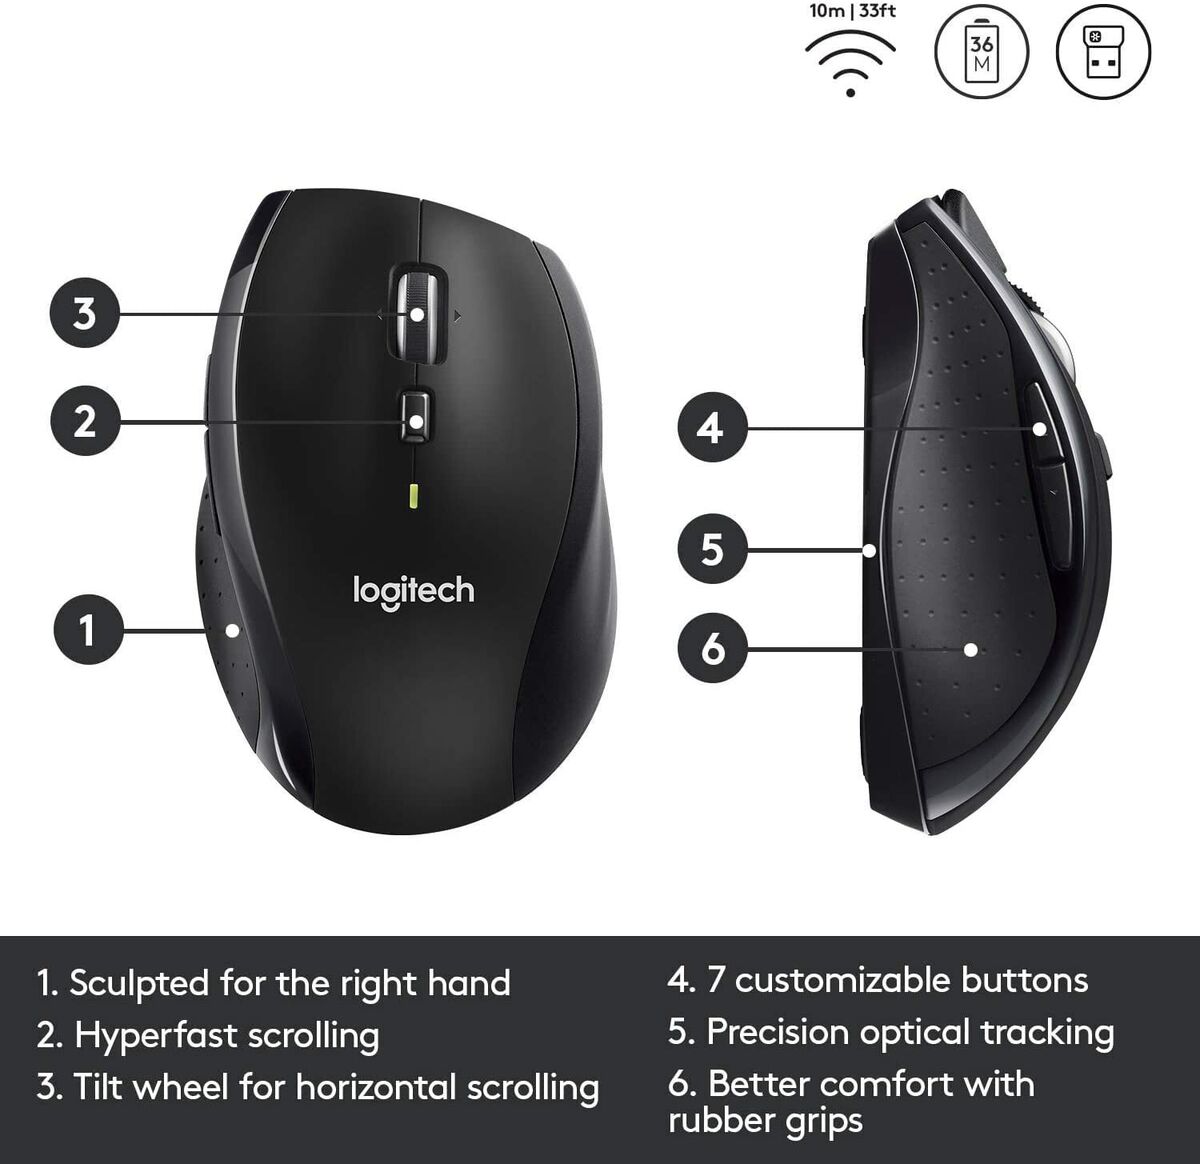 Wireless Mouse, 2.4 GHz USB Unifying NEW SHIPPING 97855068538 | eBay